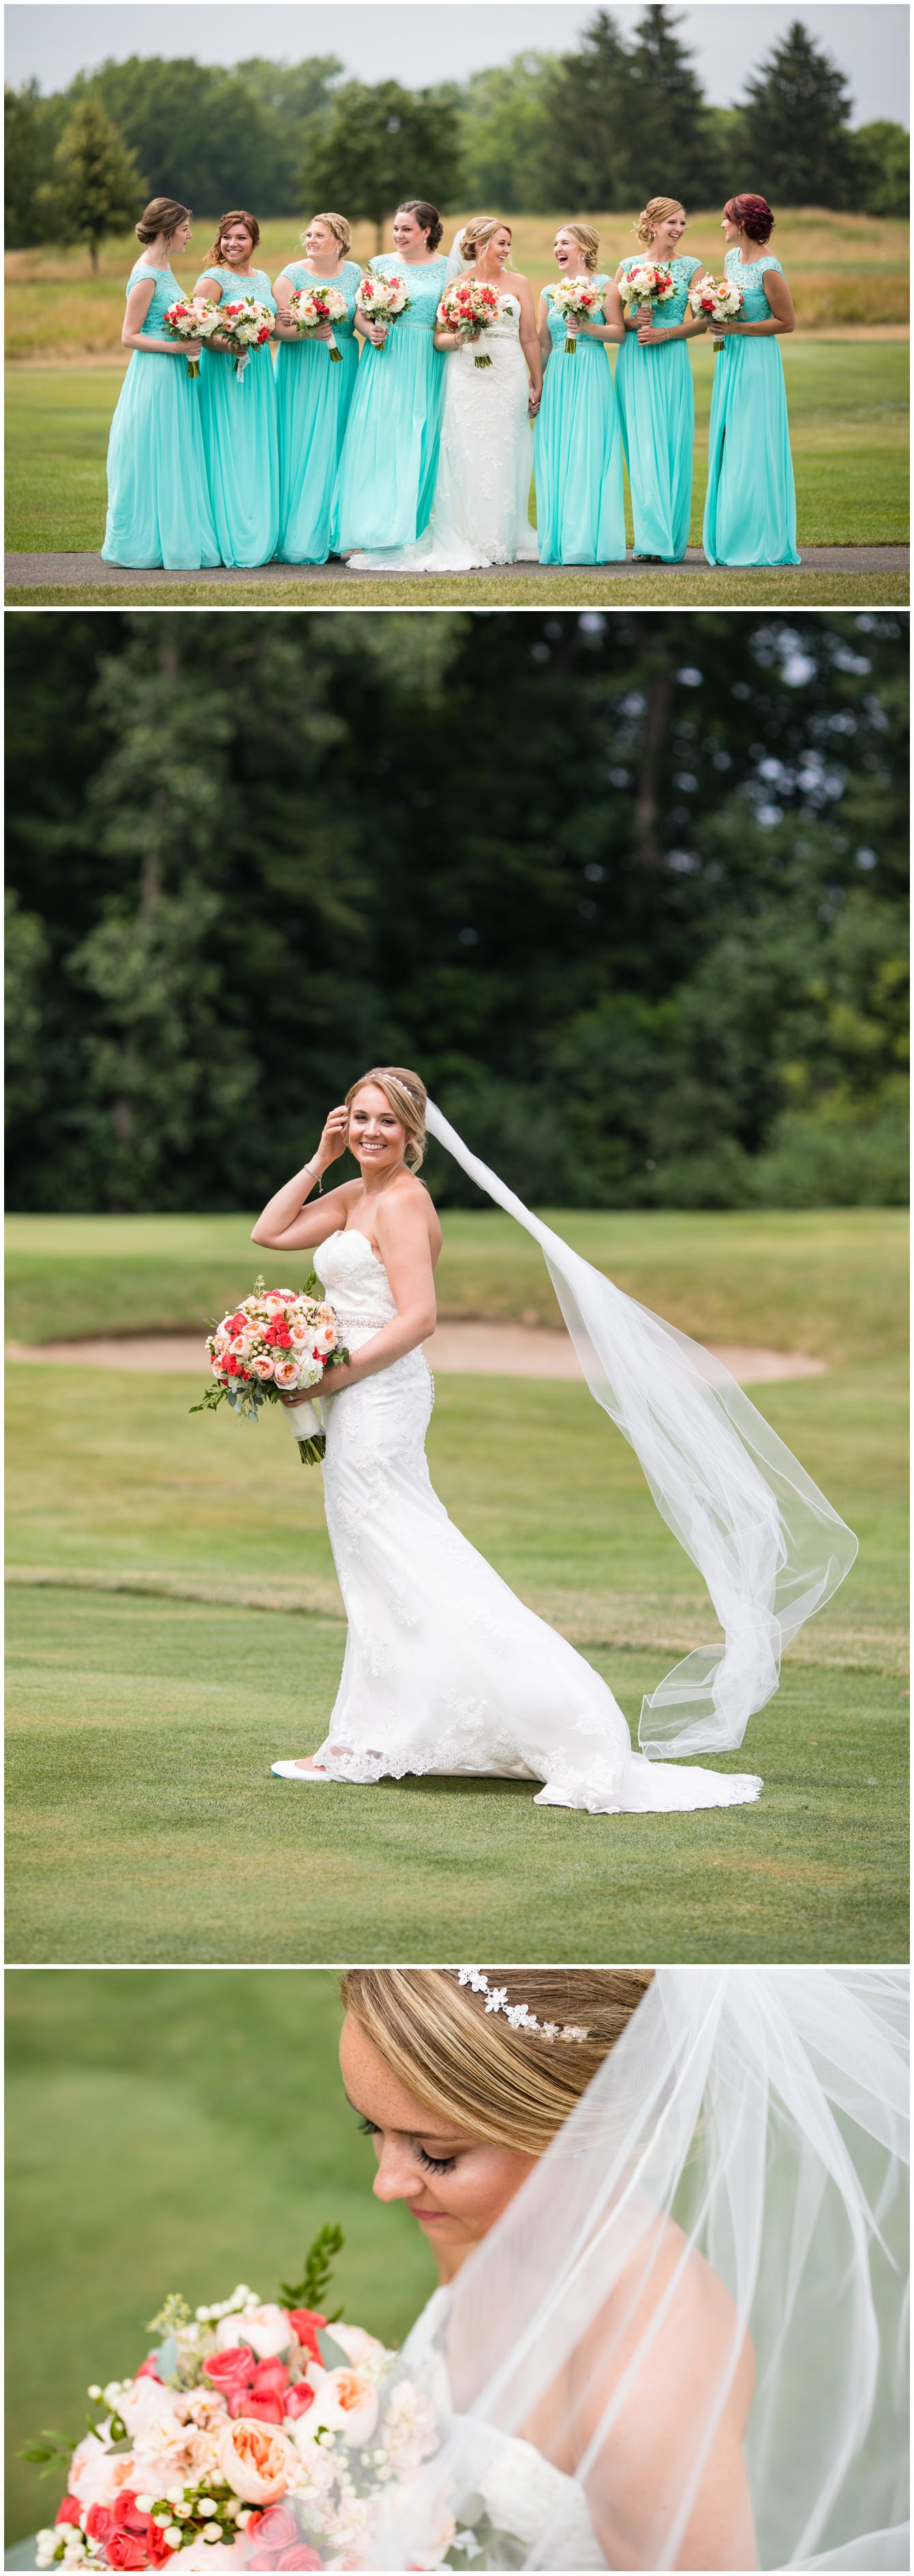 Bride and Bridesmaids portraits on the golf course at Fox Hills in Plymouth Michigan